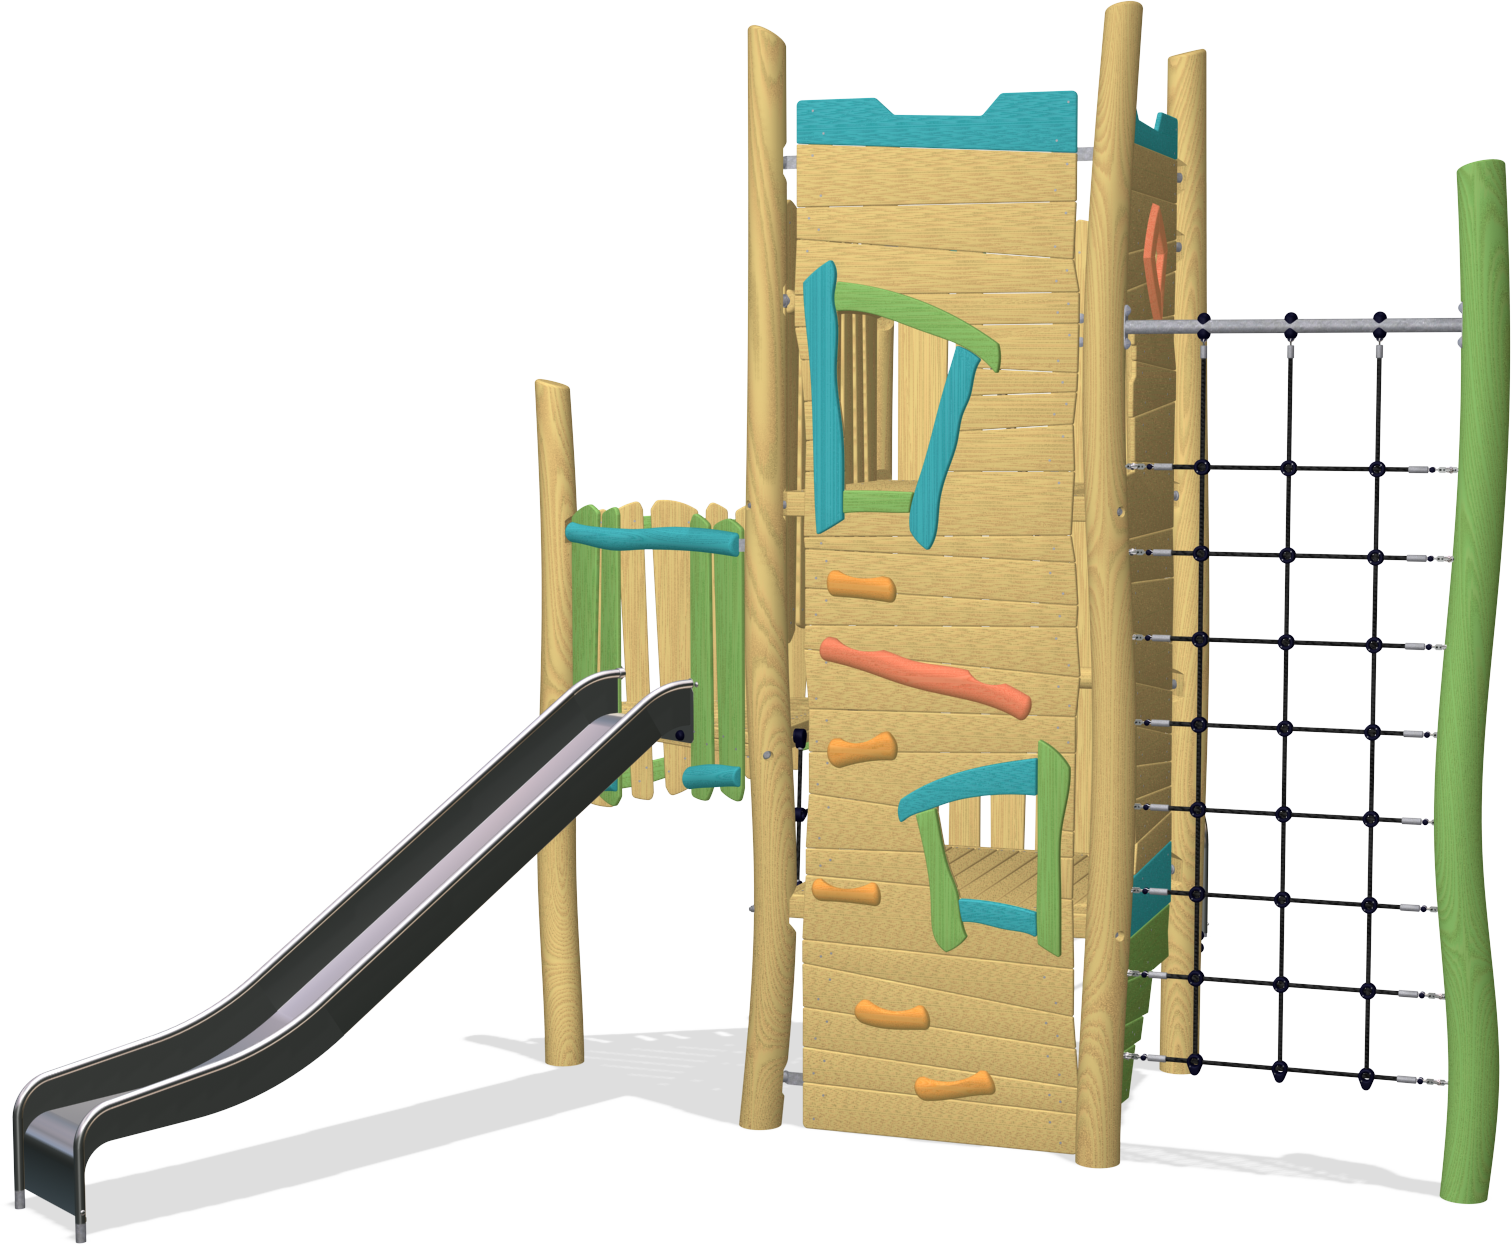 Product Images - Playground (1511x1245)